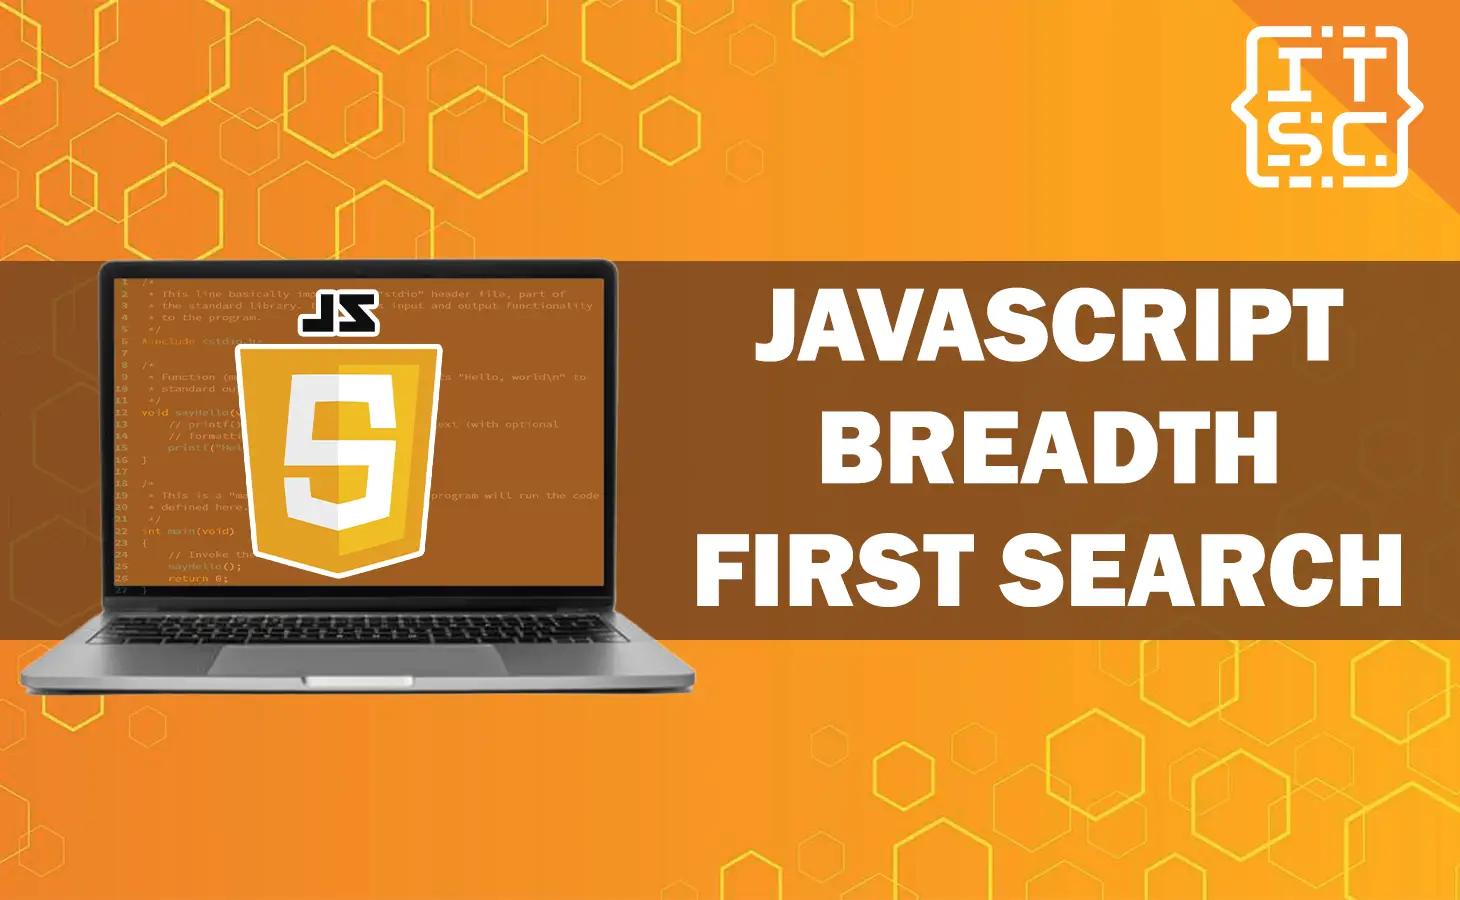 Javascript Breadth first search